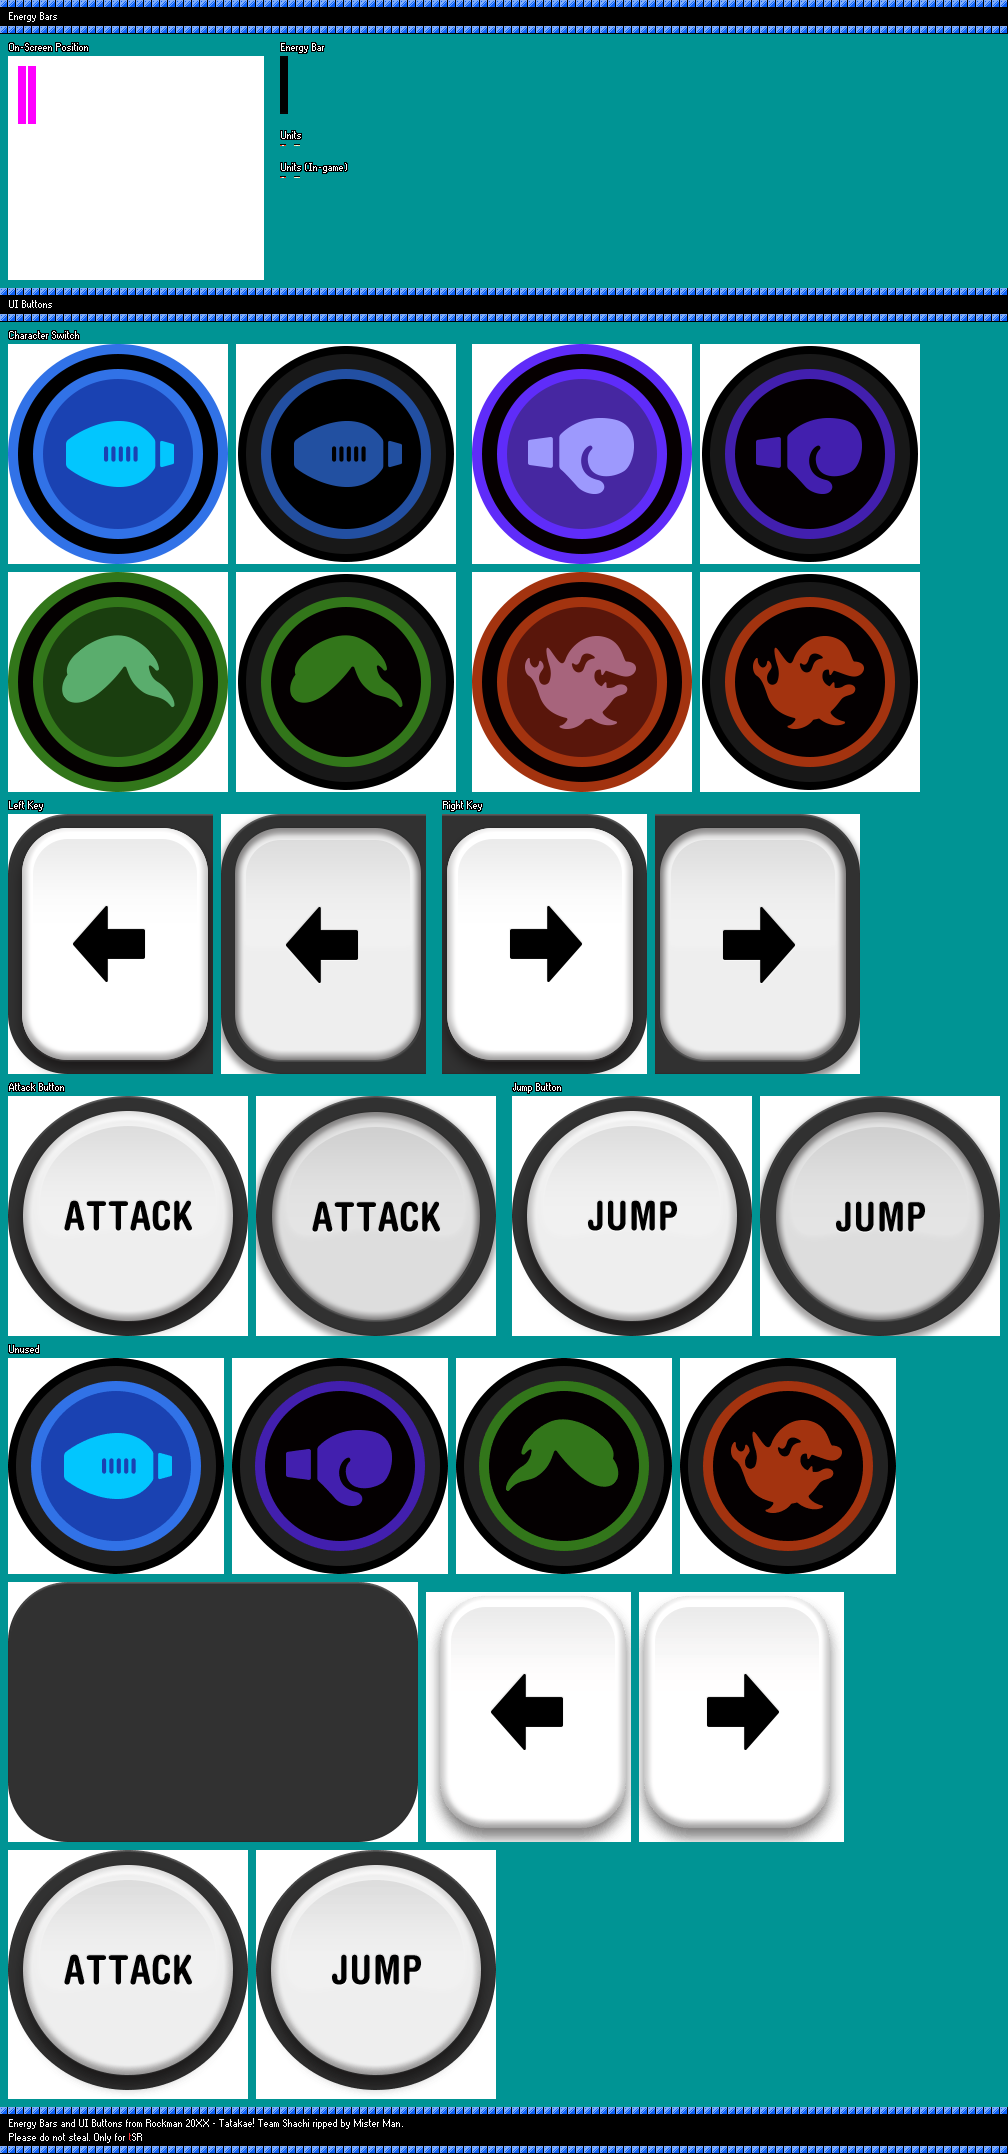 Energy Bars and UI Buttons